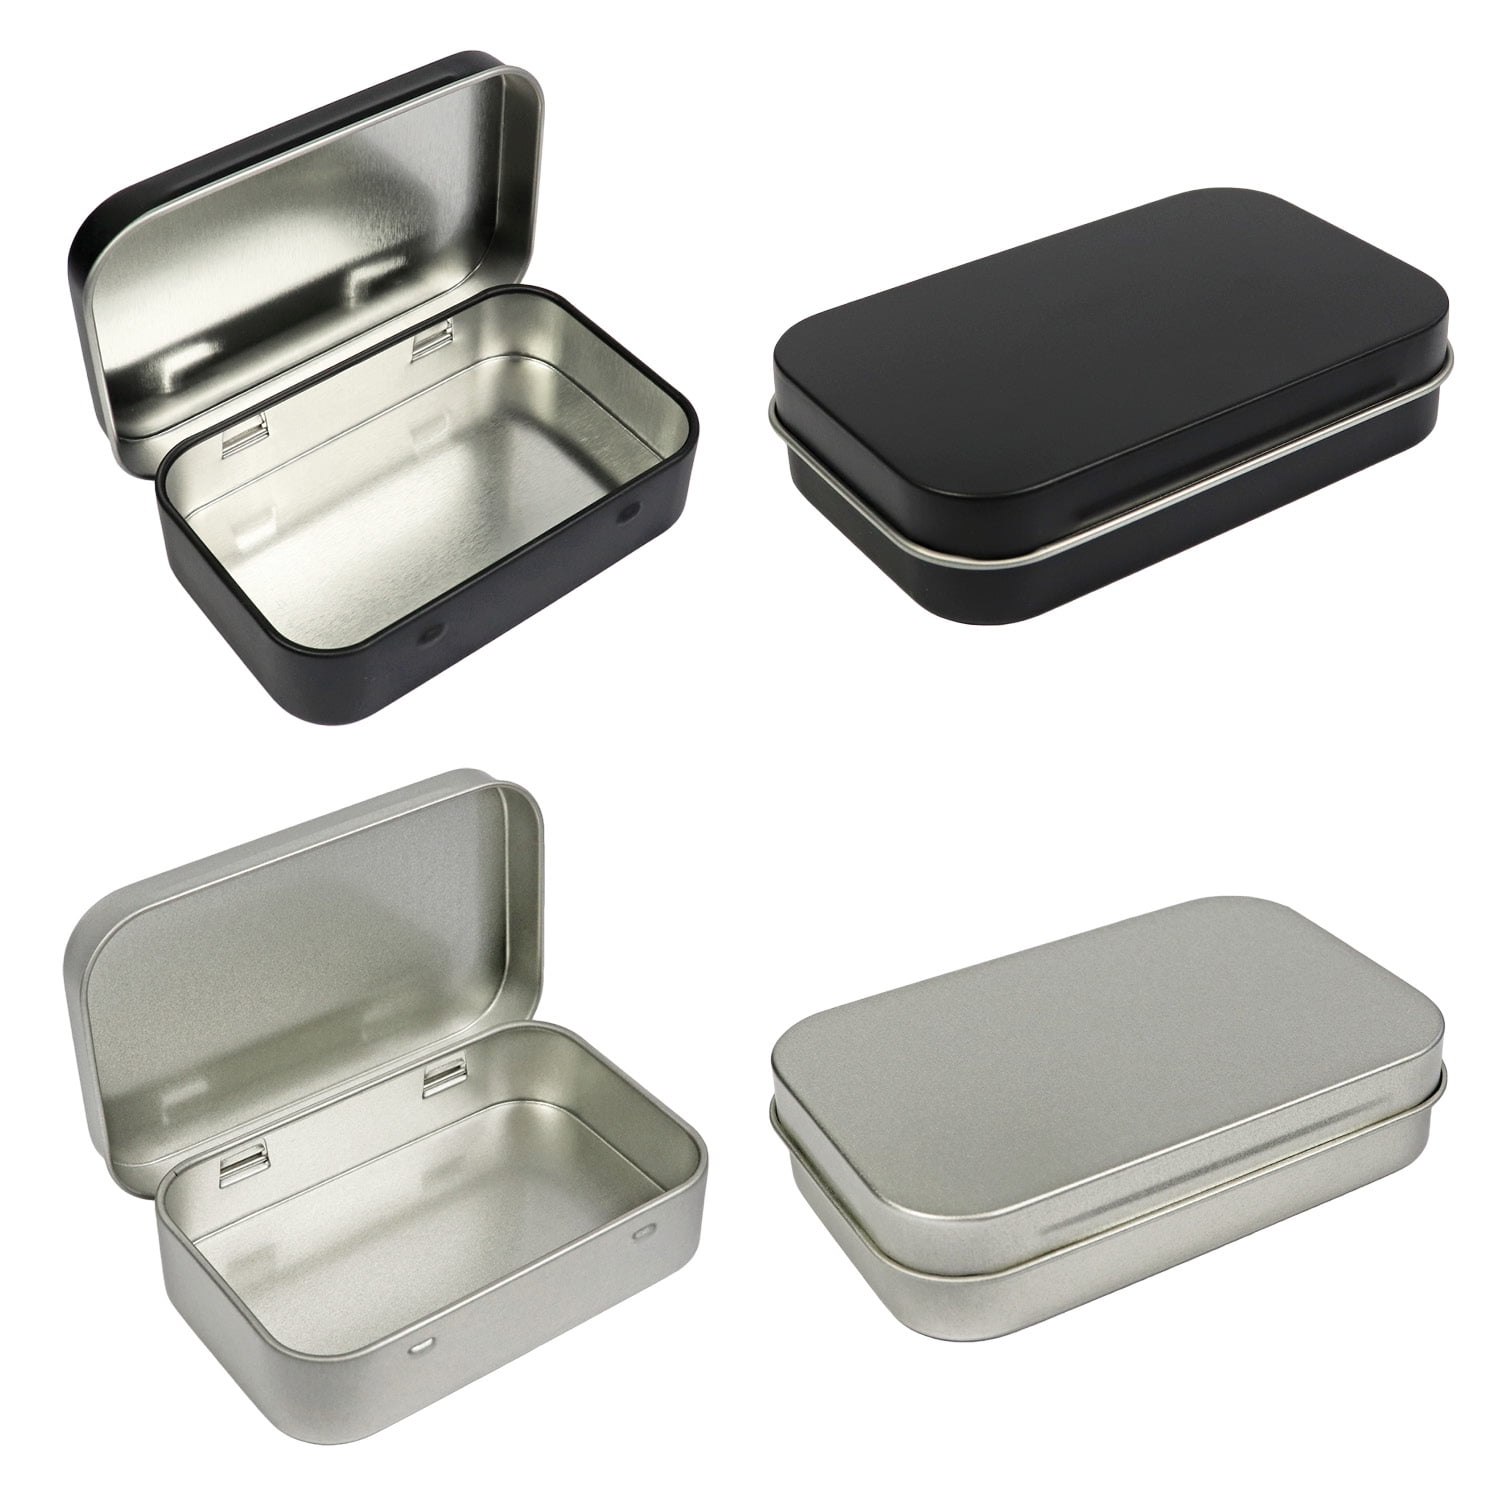 Small Items Tinplate Box Metal Storage Case Rectangular For Home Convenient 